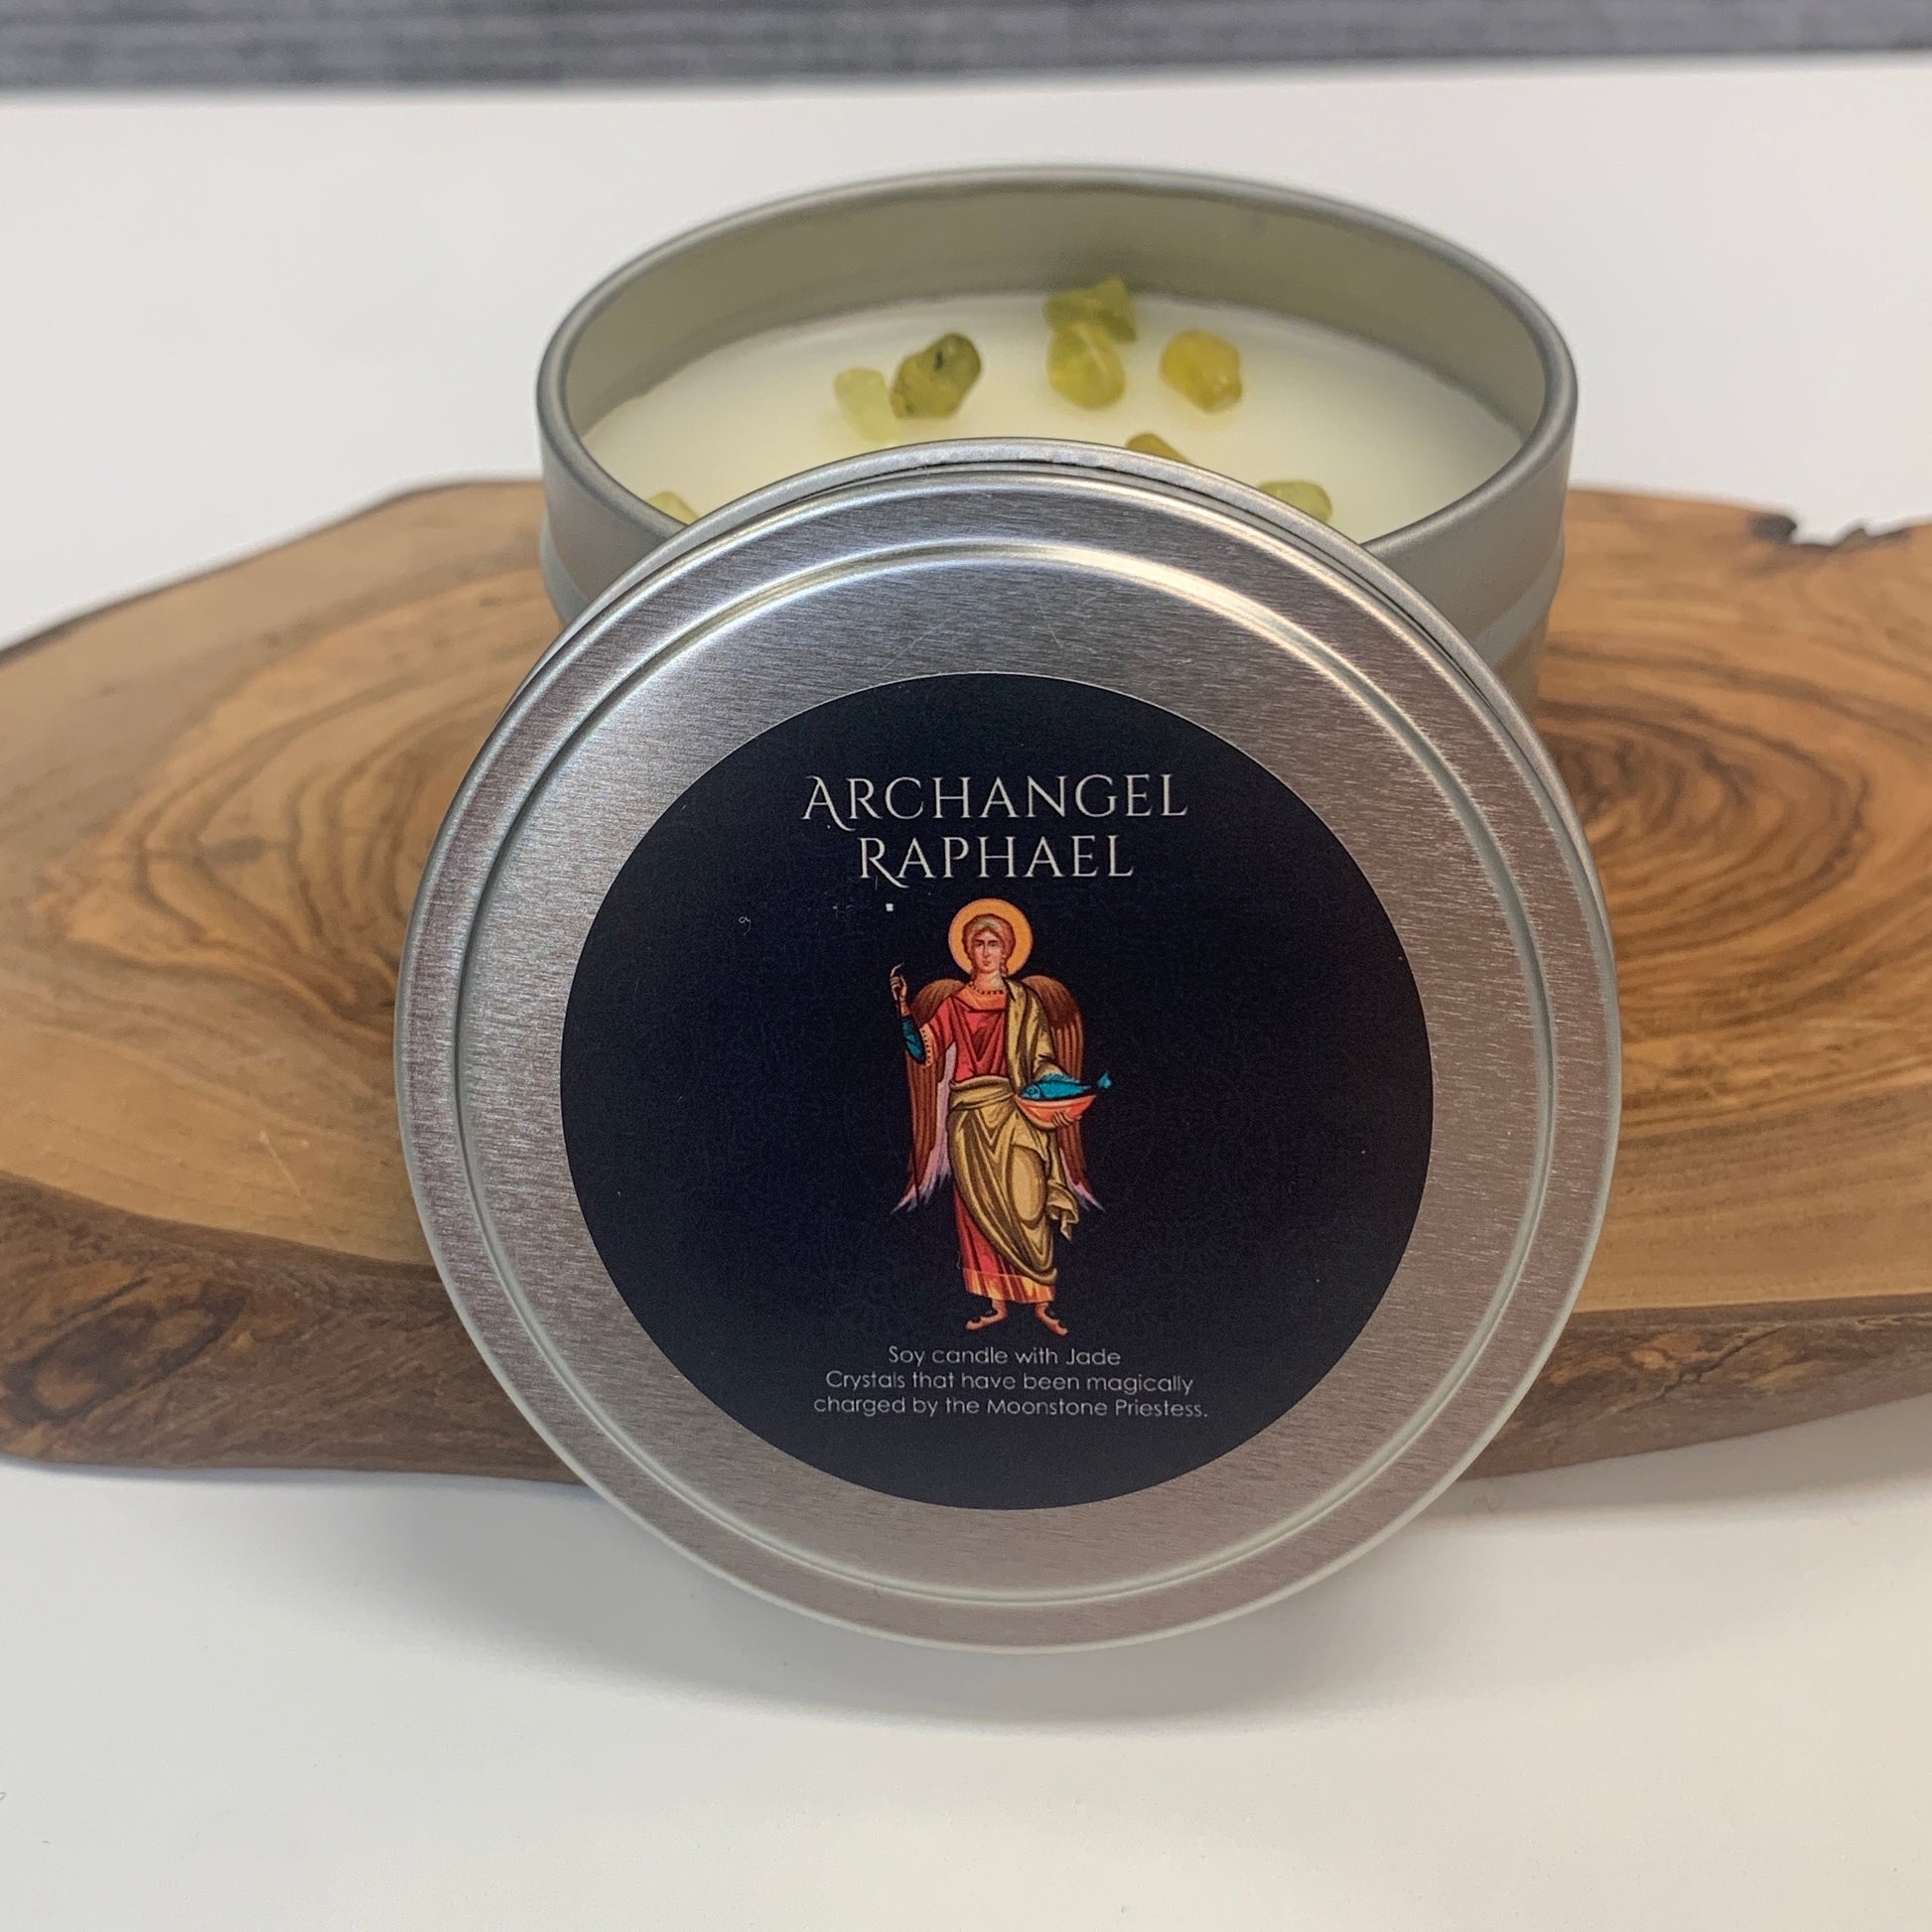 Archangel Raphael Healing Candle with Jade Crystals Travel Tin